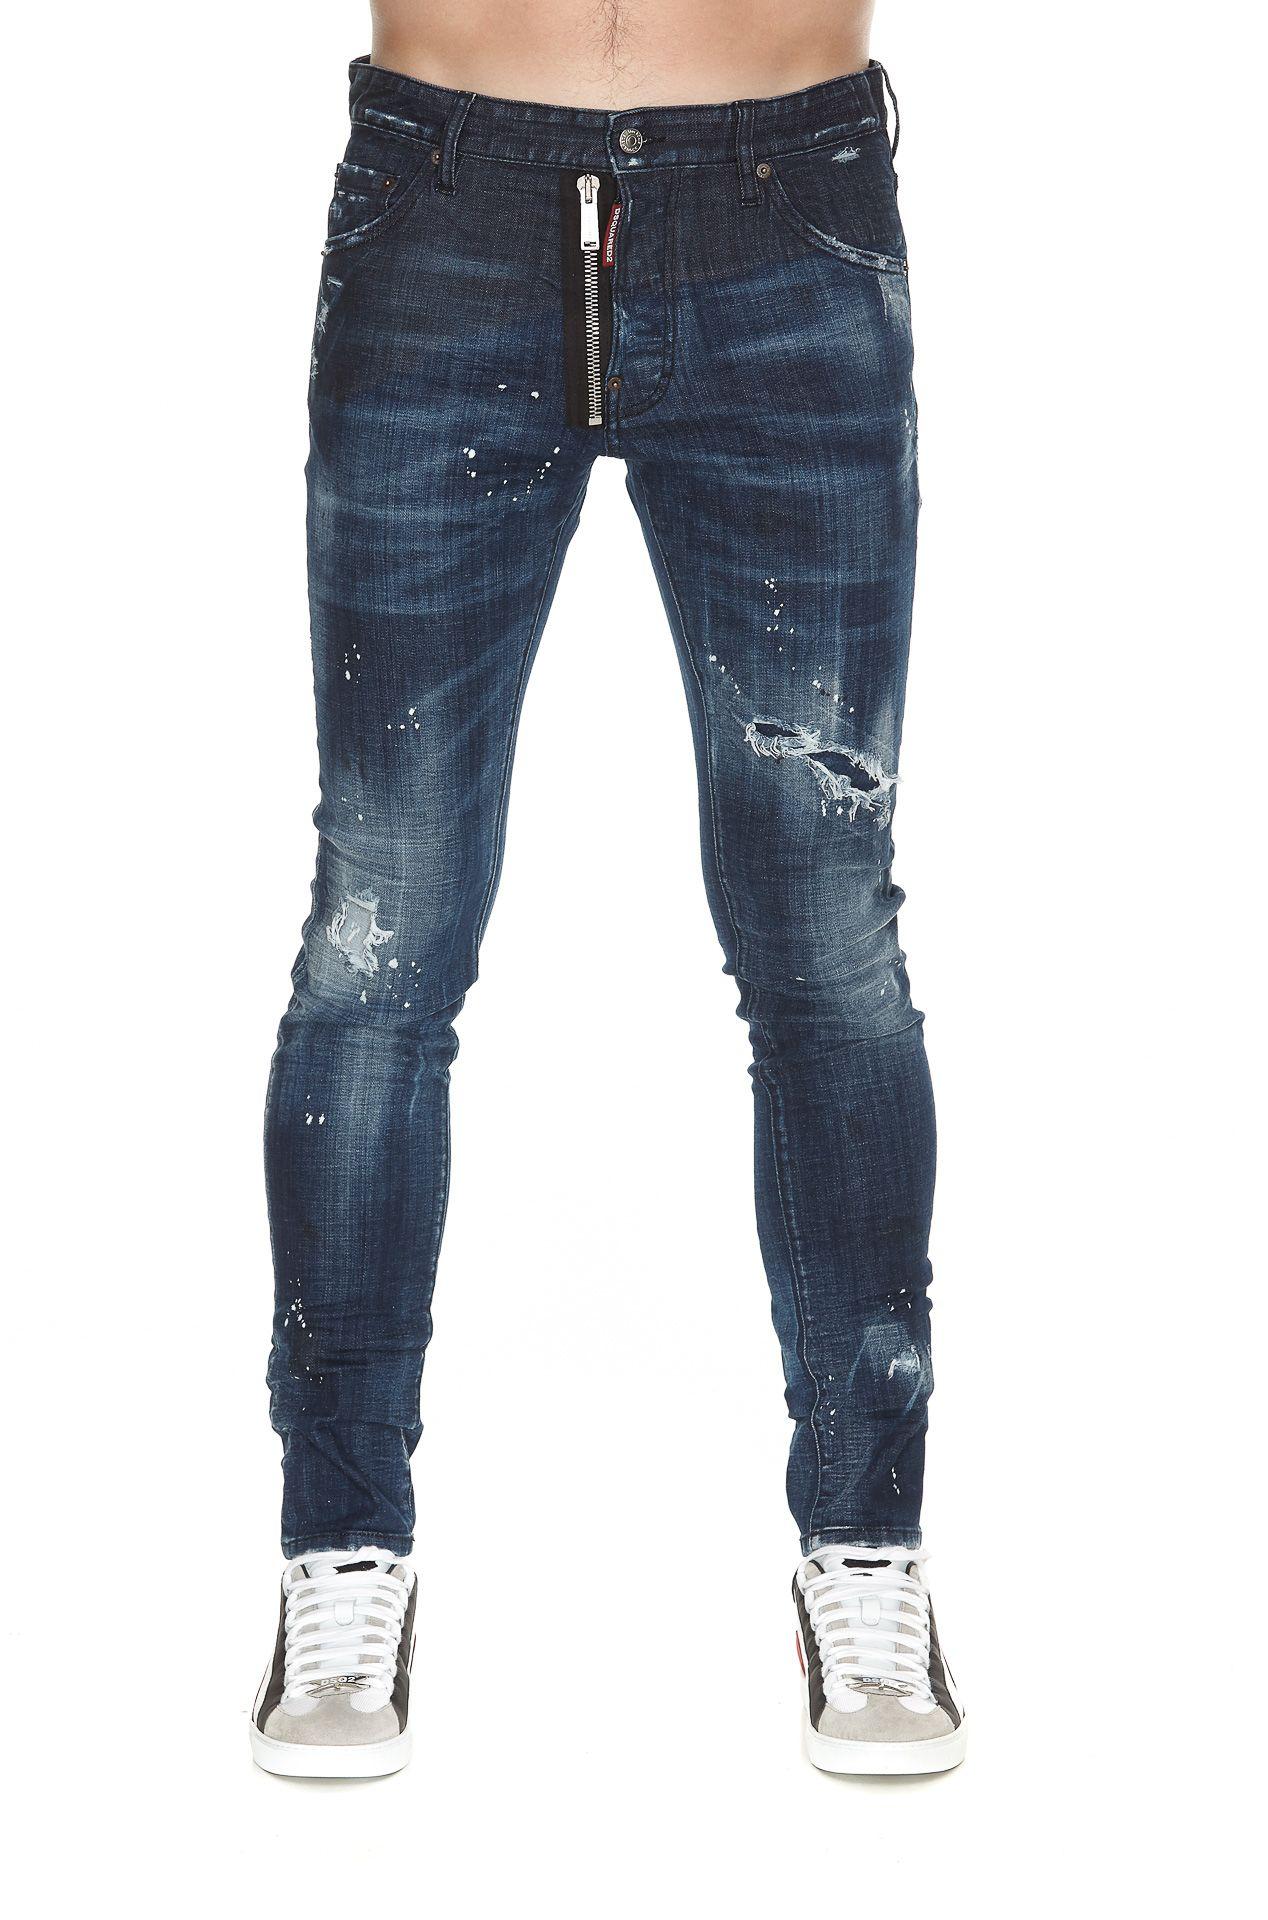 dsquared cool guy jeans sale